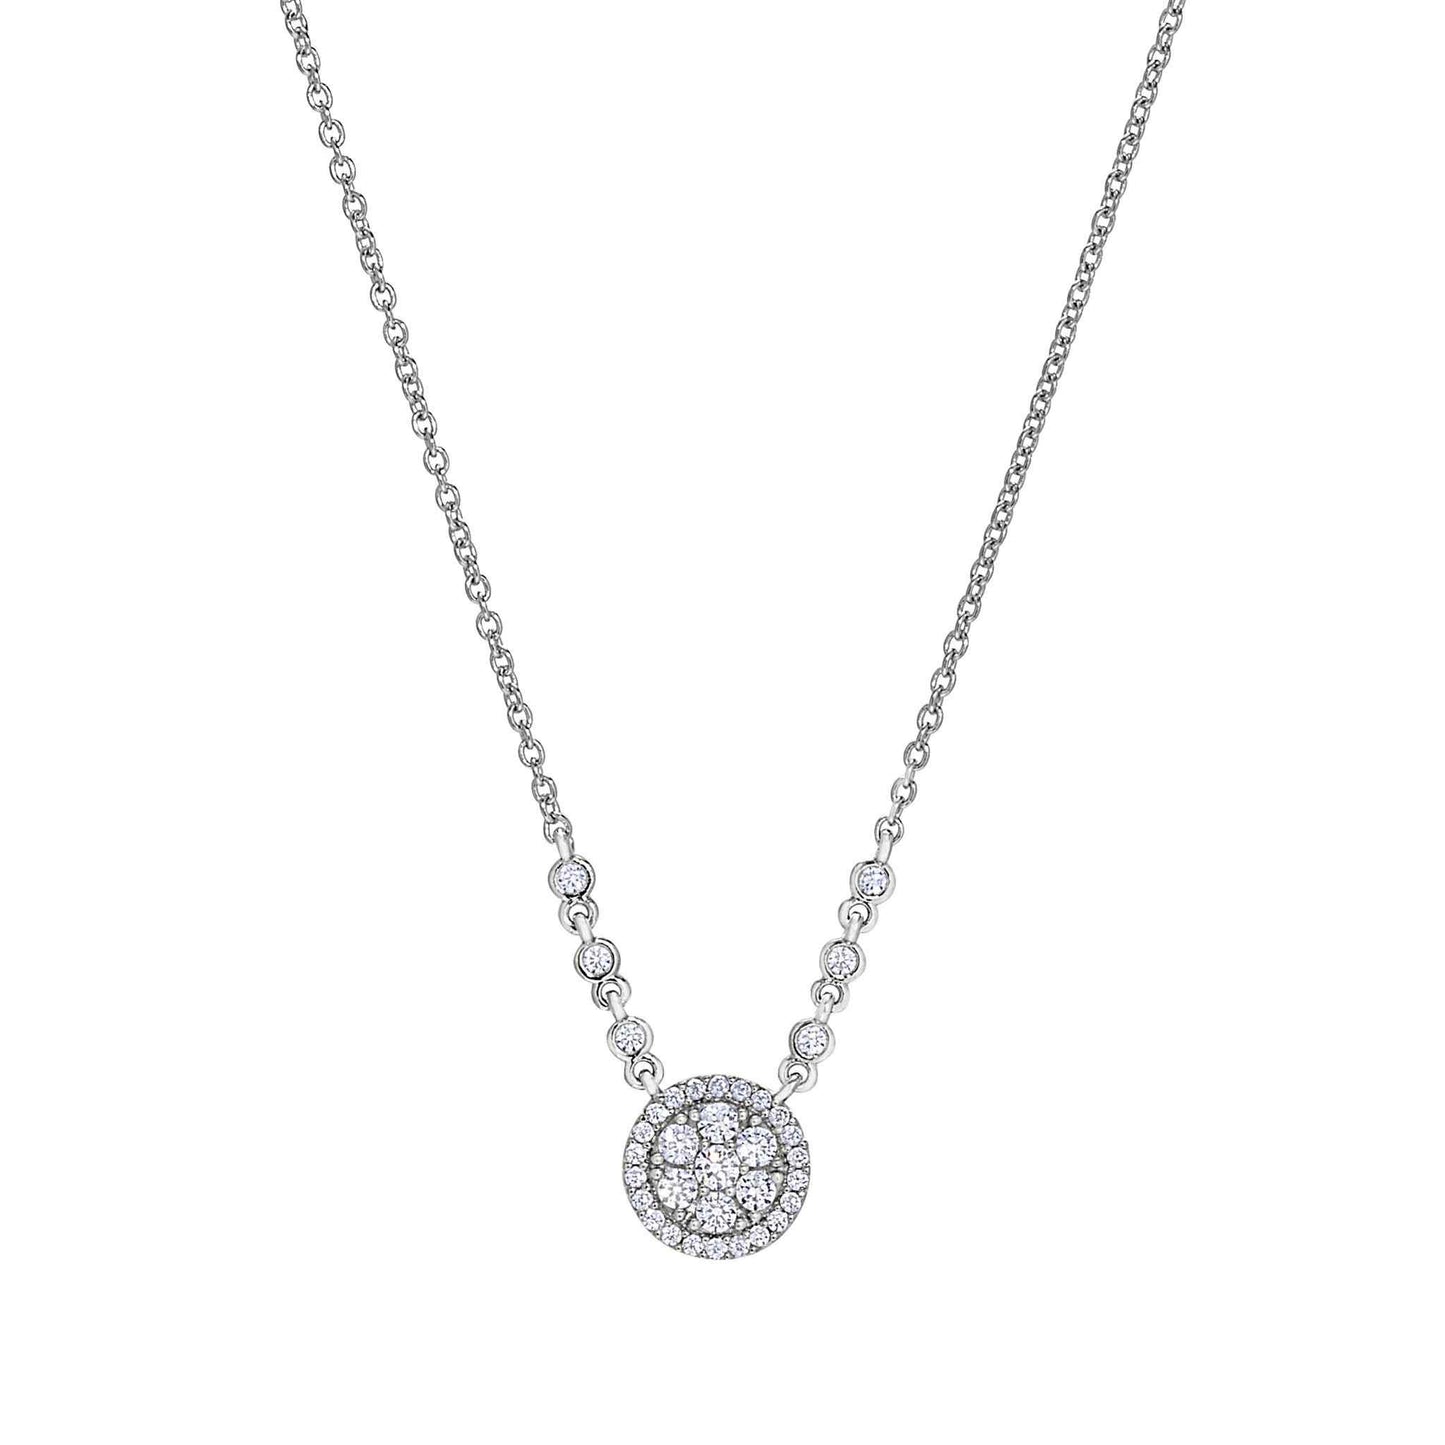 A necklace with simulated diamonds displayed on a neutral white background.